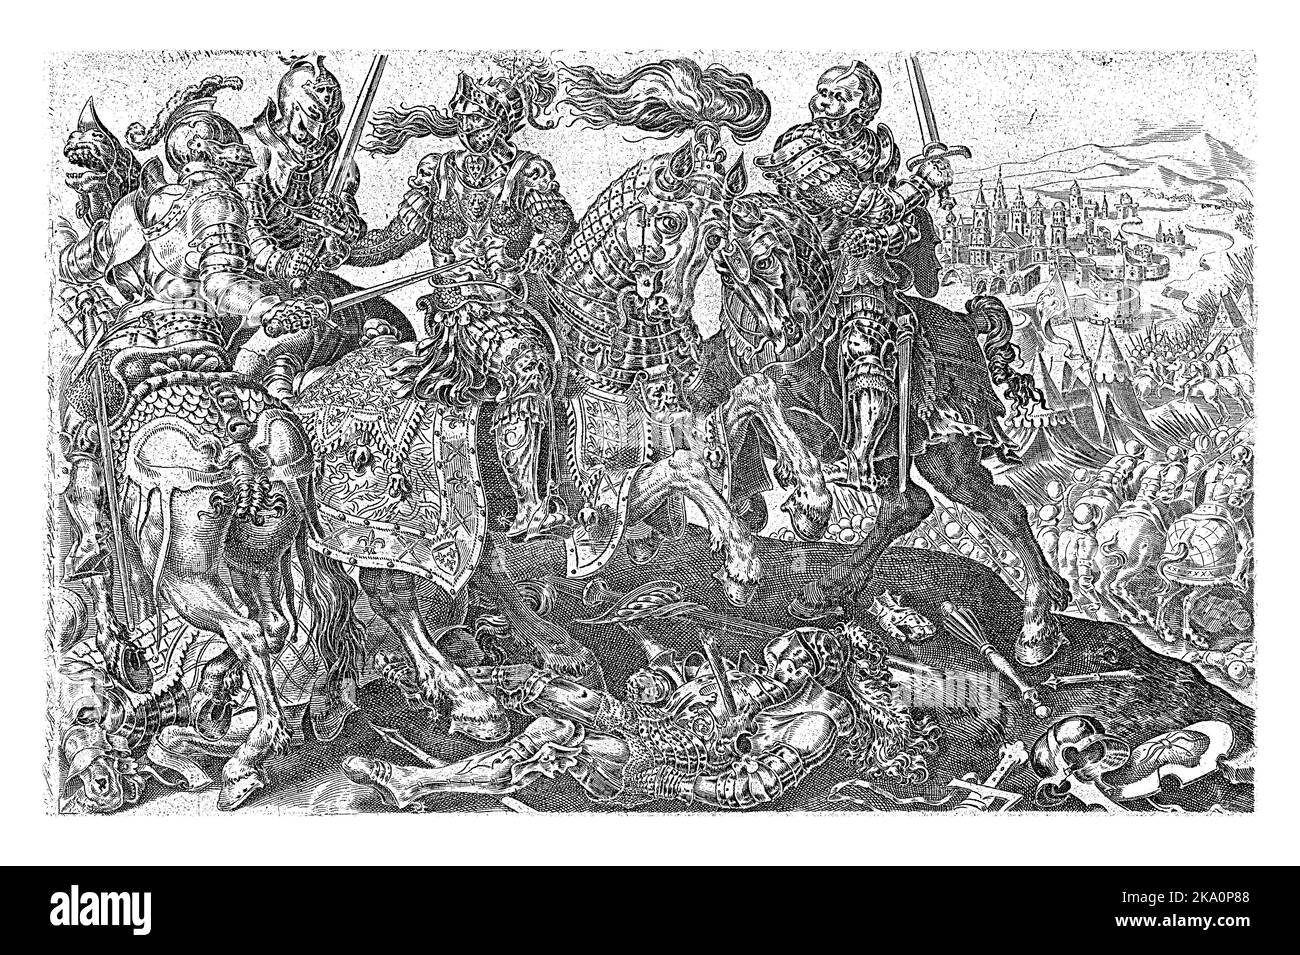 The capture of Francis I, king of France, during the battle of Pavia in 1525. The king on horseback is surrounded by three knights, also on horseback. Stock Photo